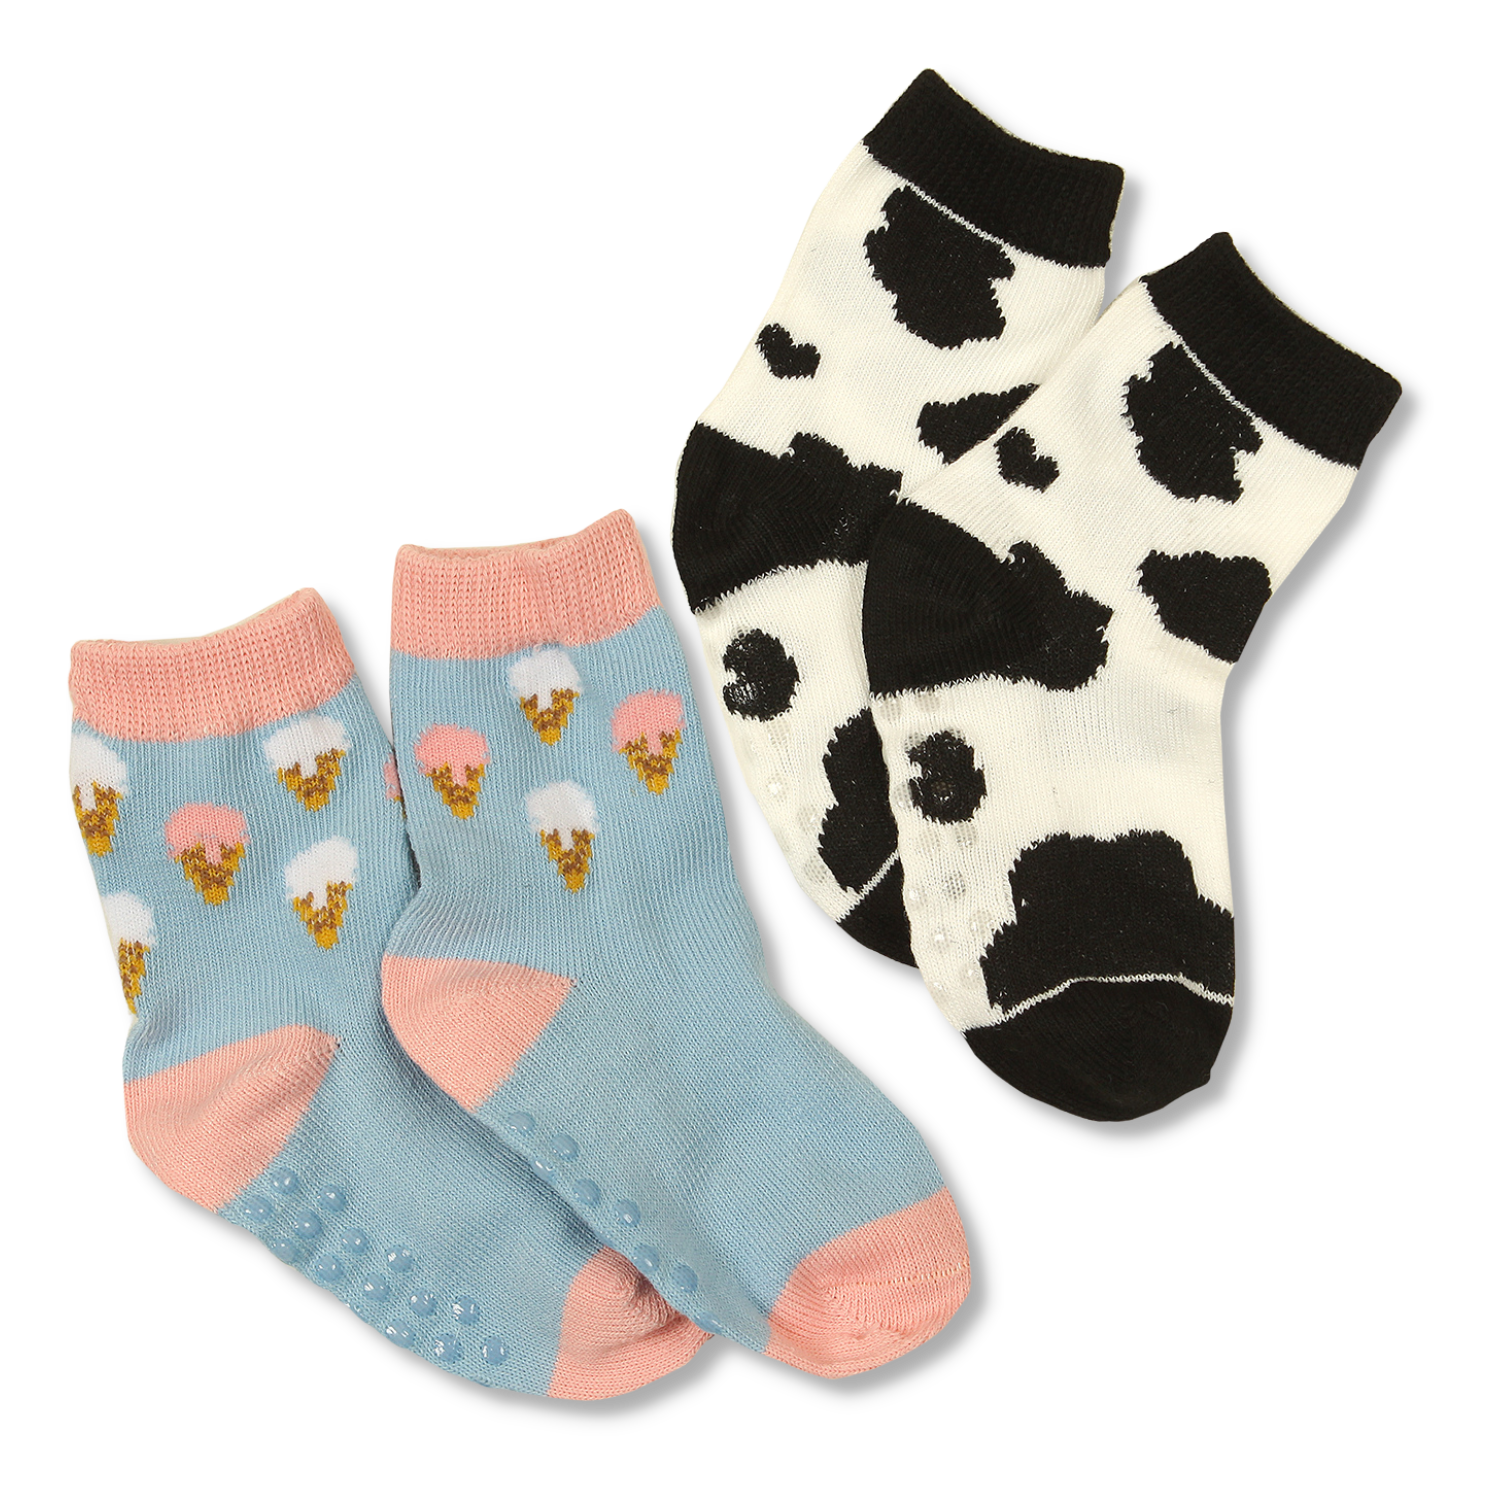 Baby Socks - Cones and Spots